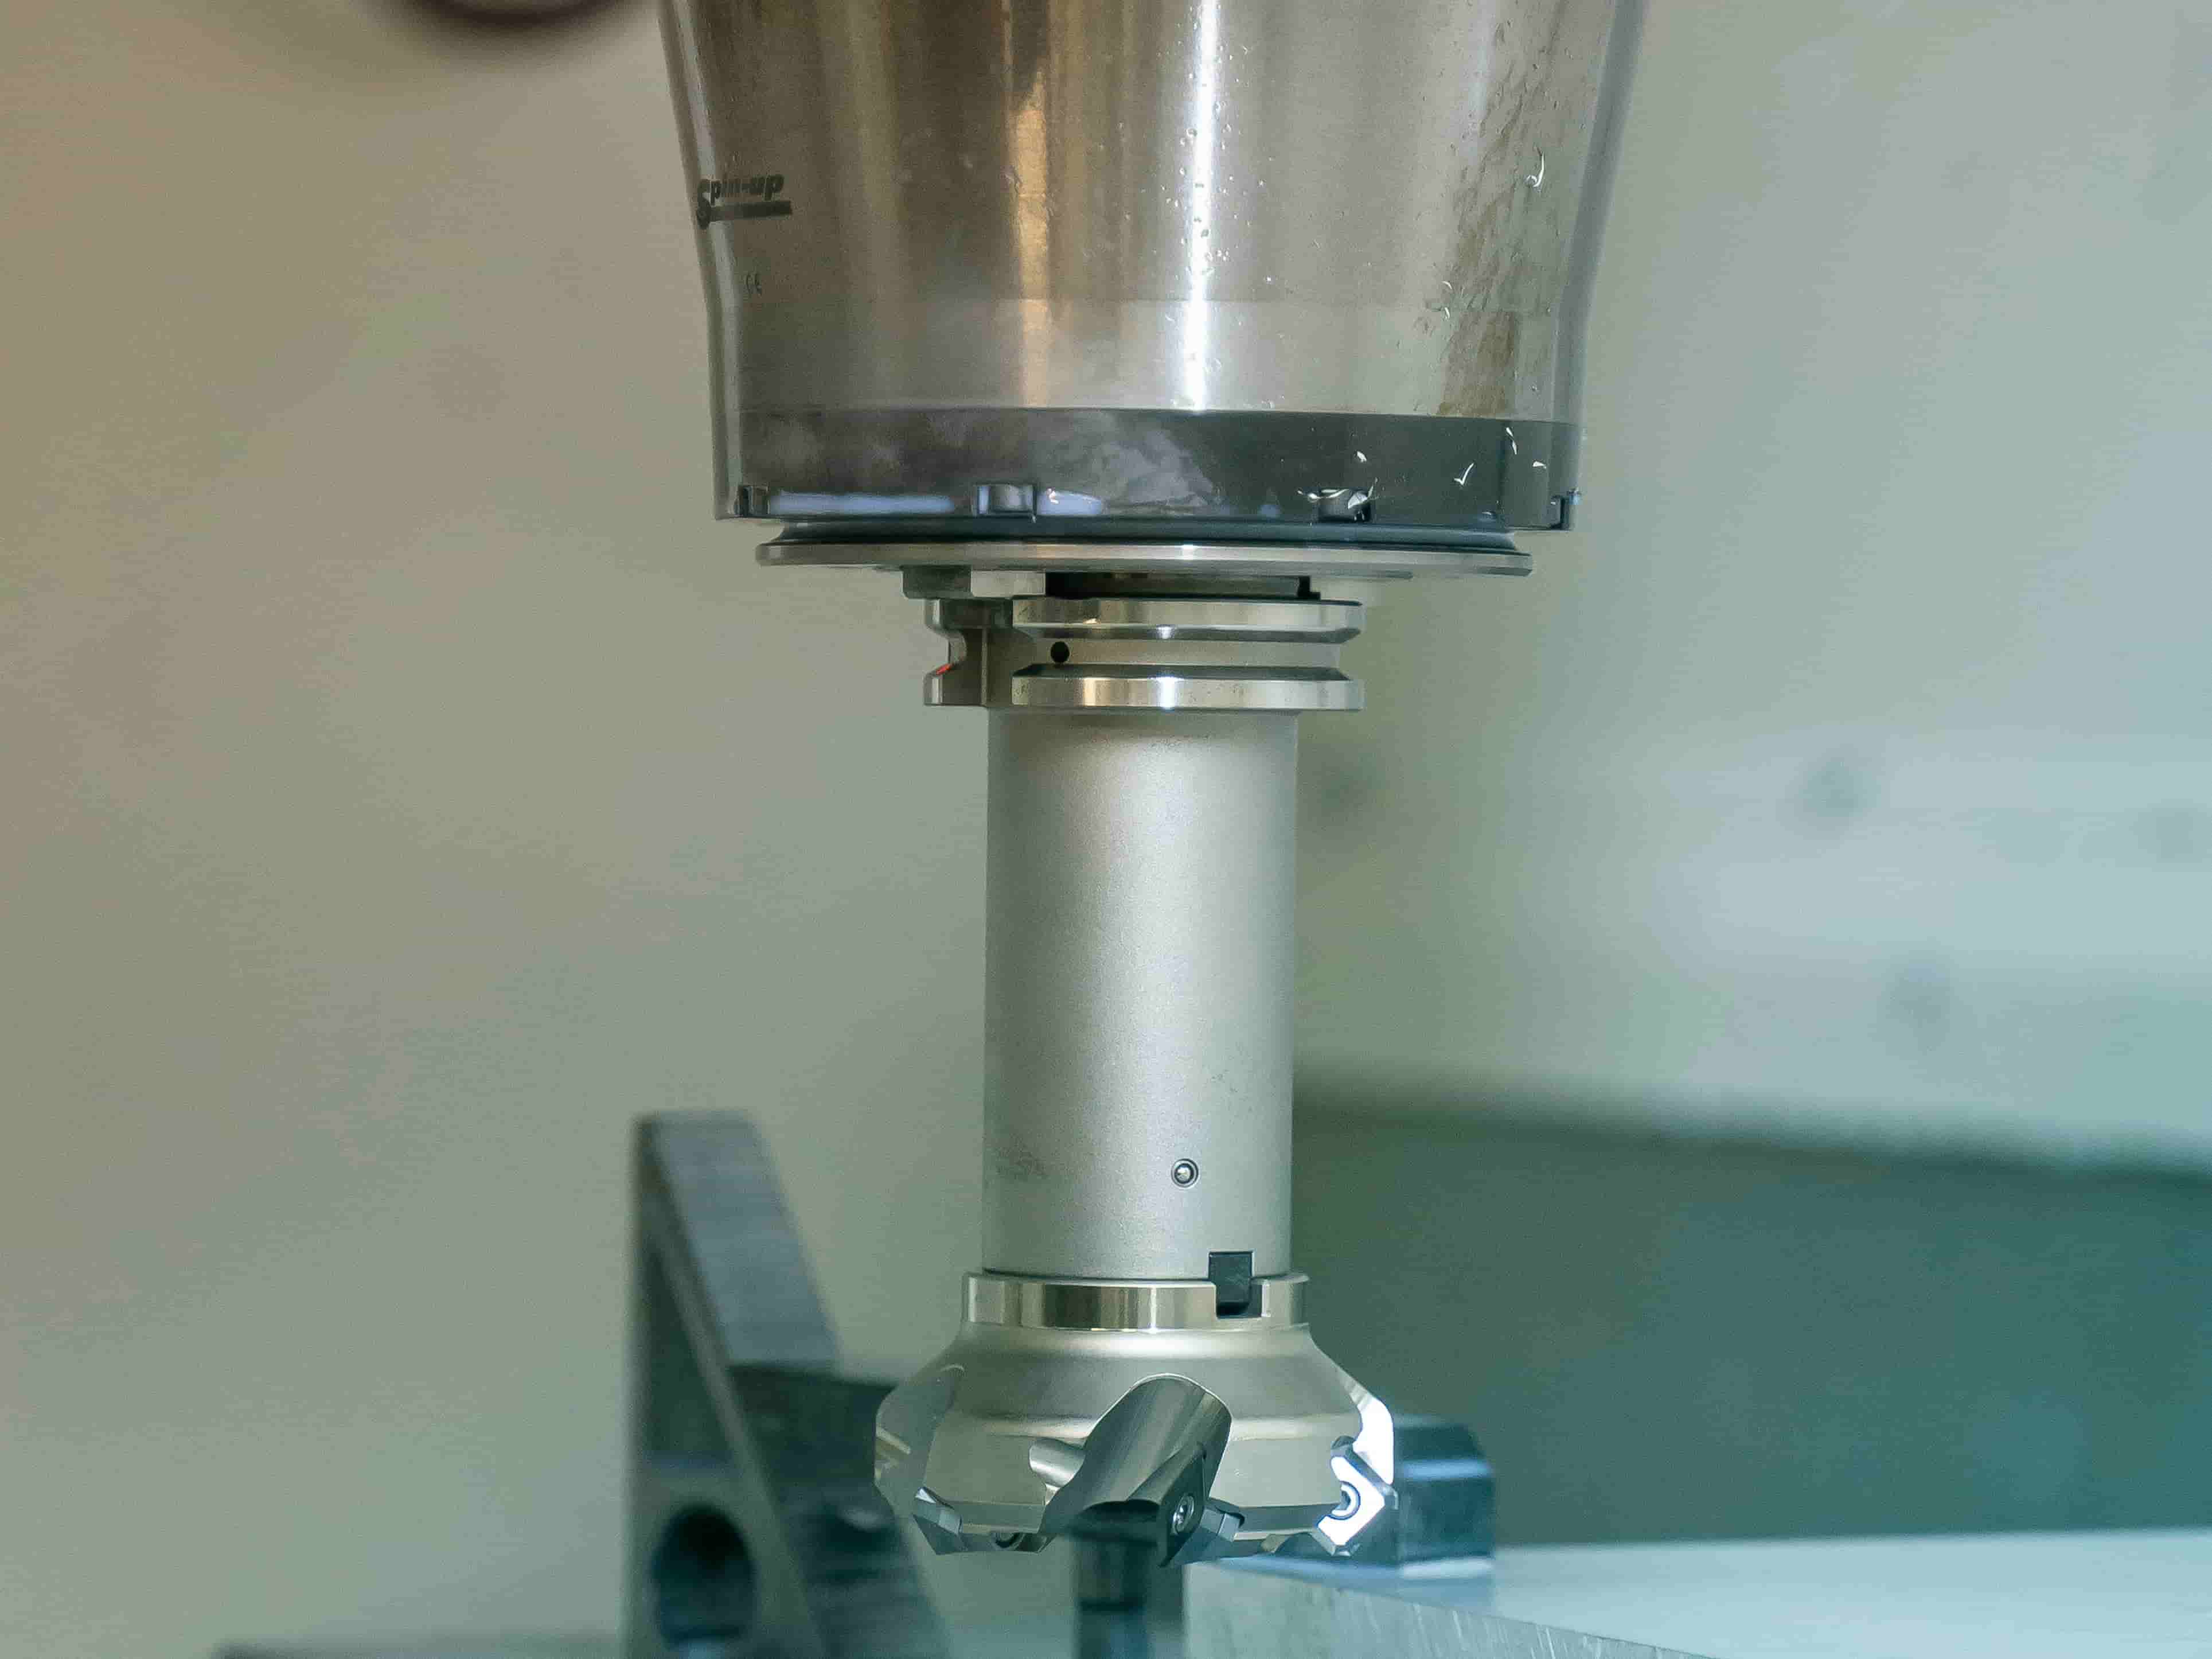 What are the difference between CNC machining and 3D printing